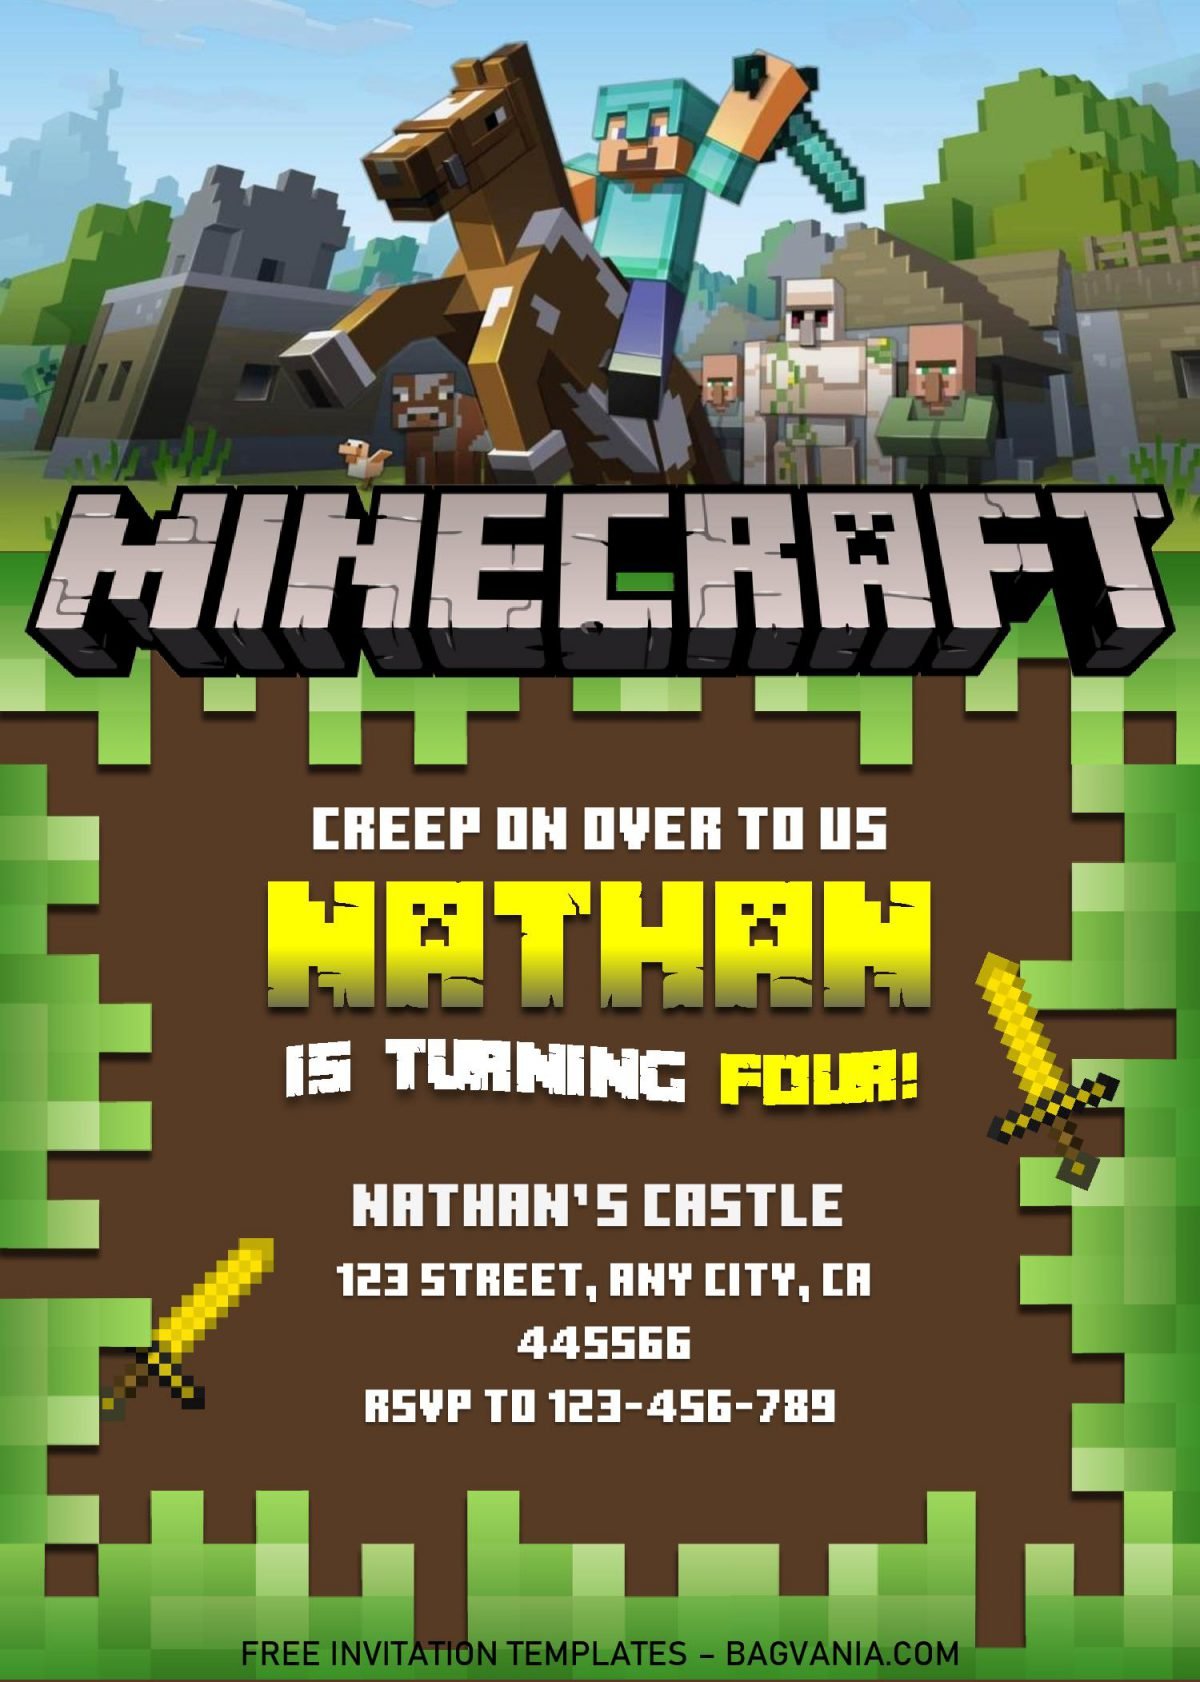 Minecraft Birthday Invitation Templates - Editable With MS Word and has green background